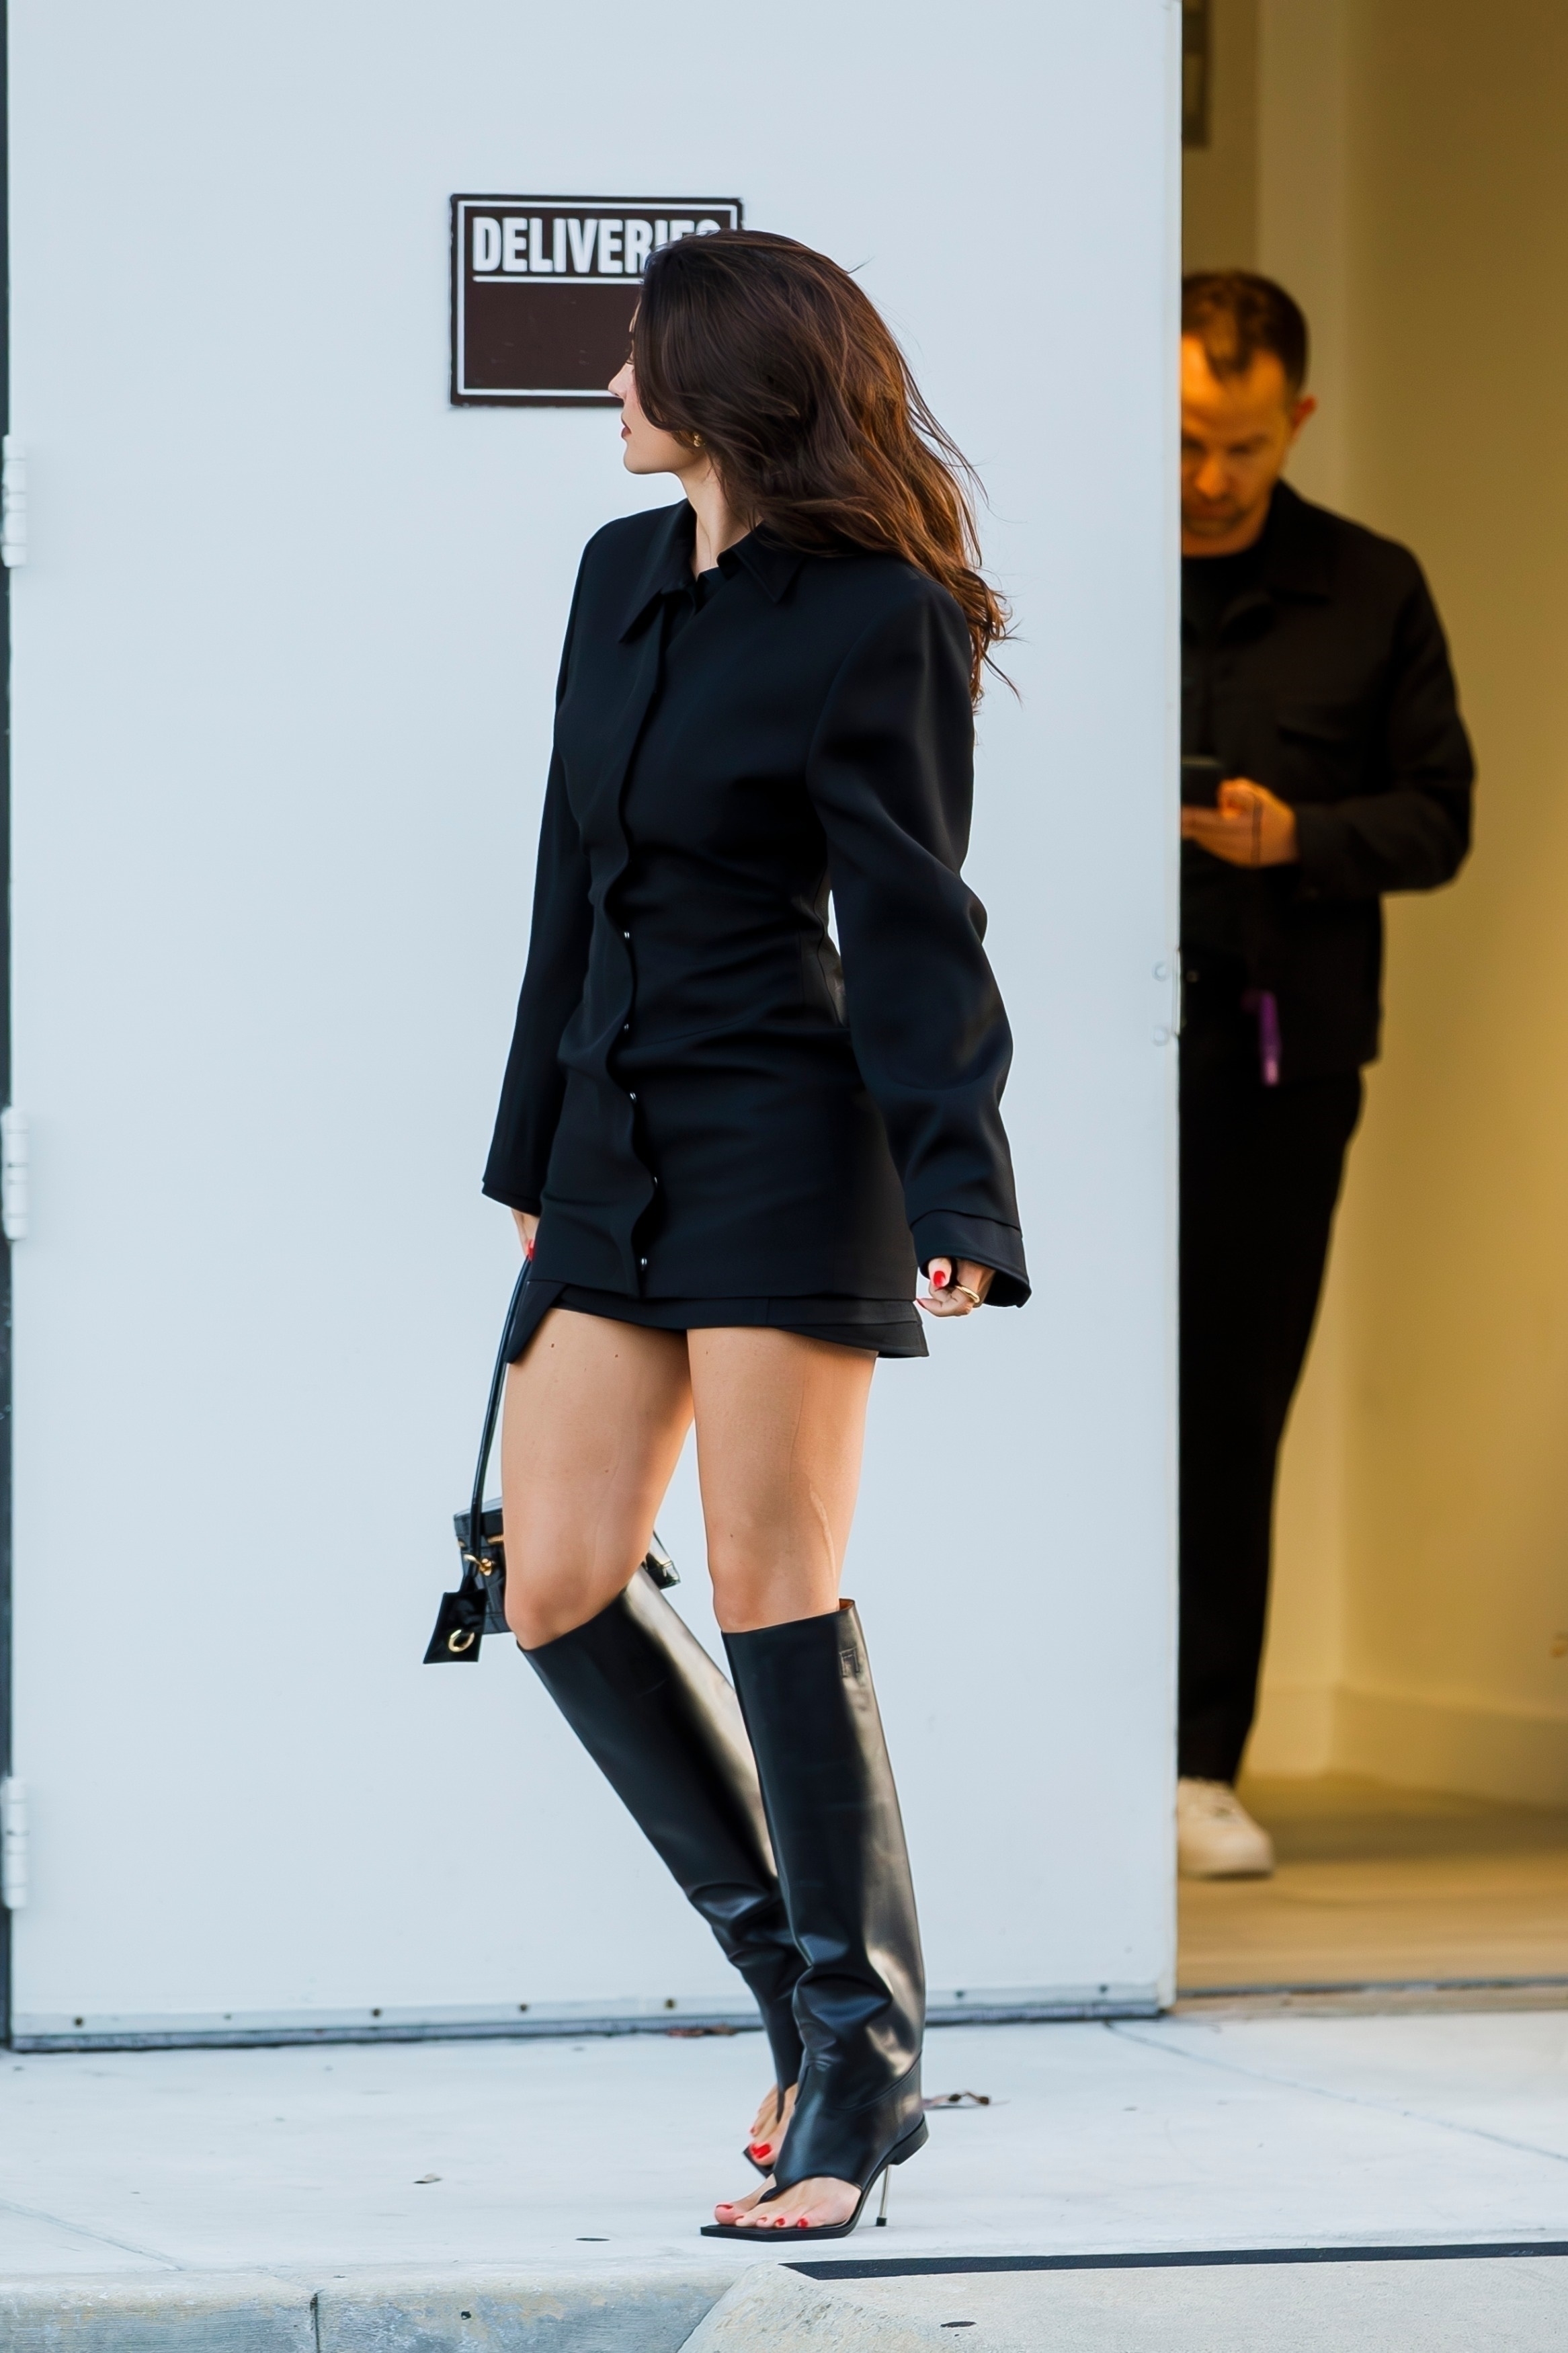 The star showed off her toned legs while wearing a button-up long-sleeved dress